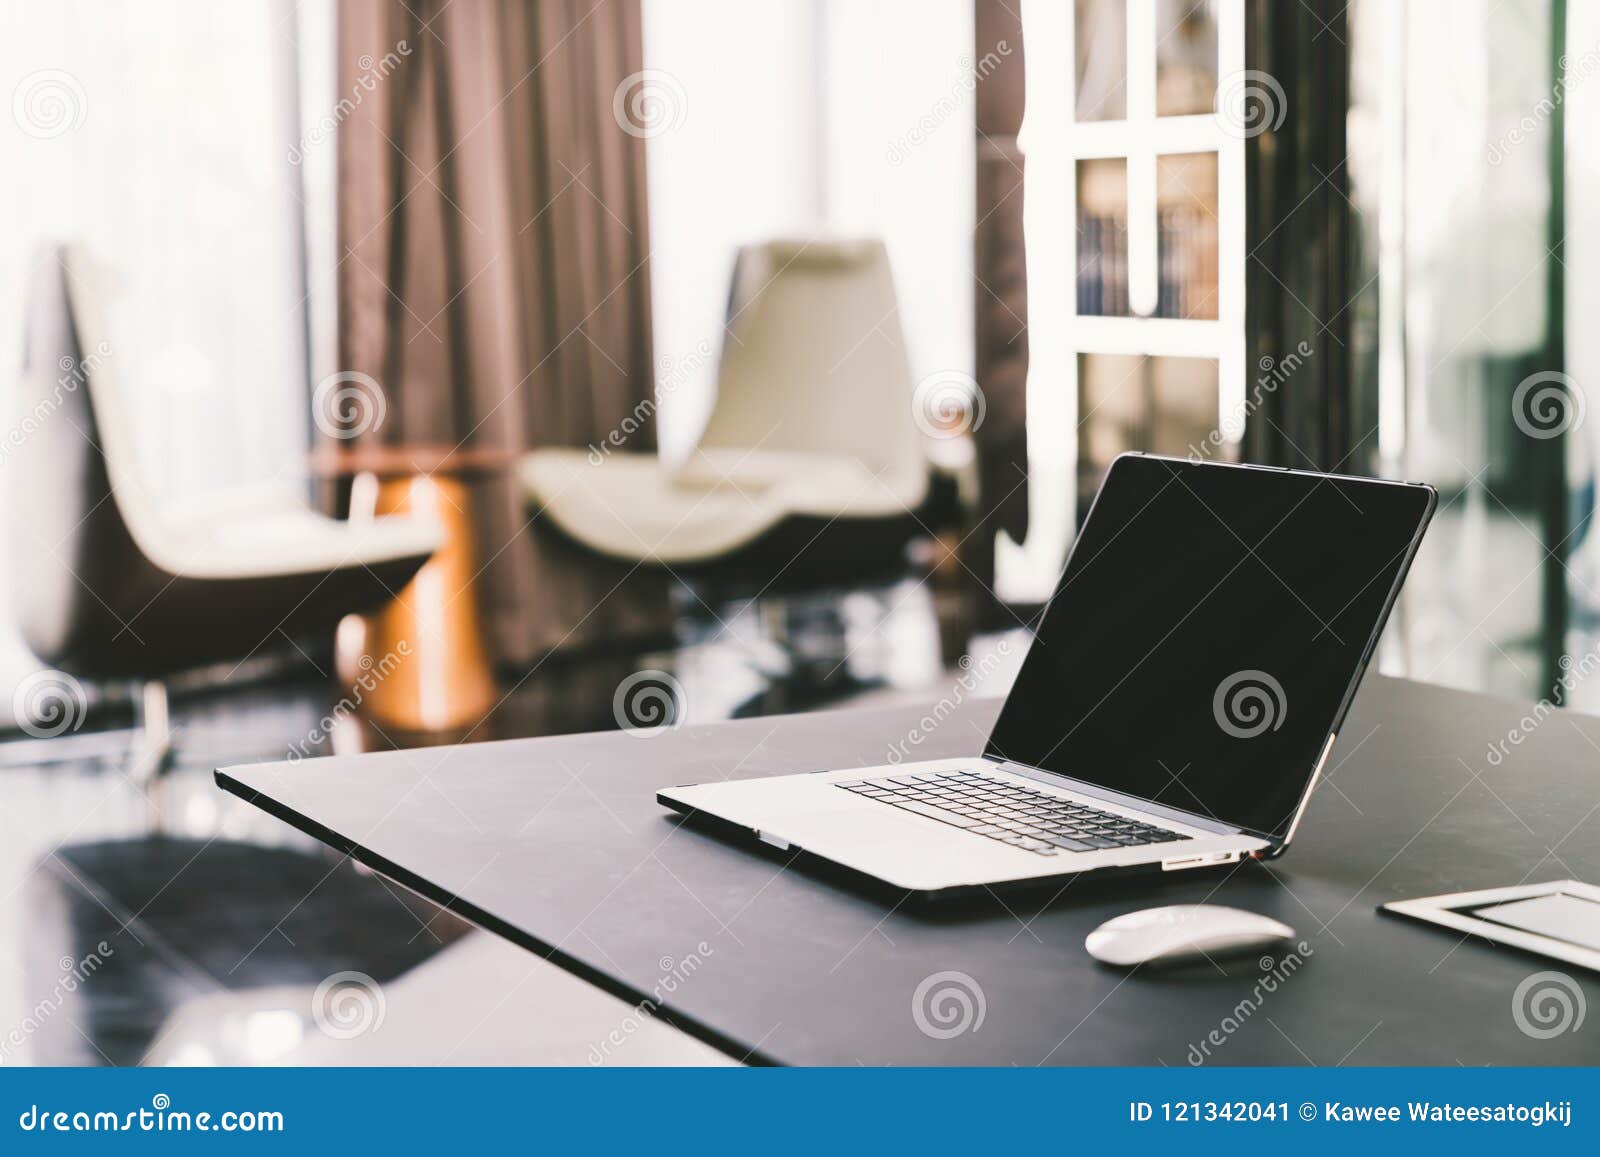 Laptop Computer On Work Table In Modern Luxury Contemporary Office Corporate Business Internet Information Technology Concept Stock Image Image Of Career Design 121342041